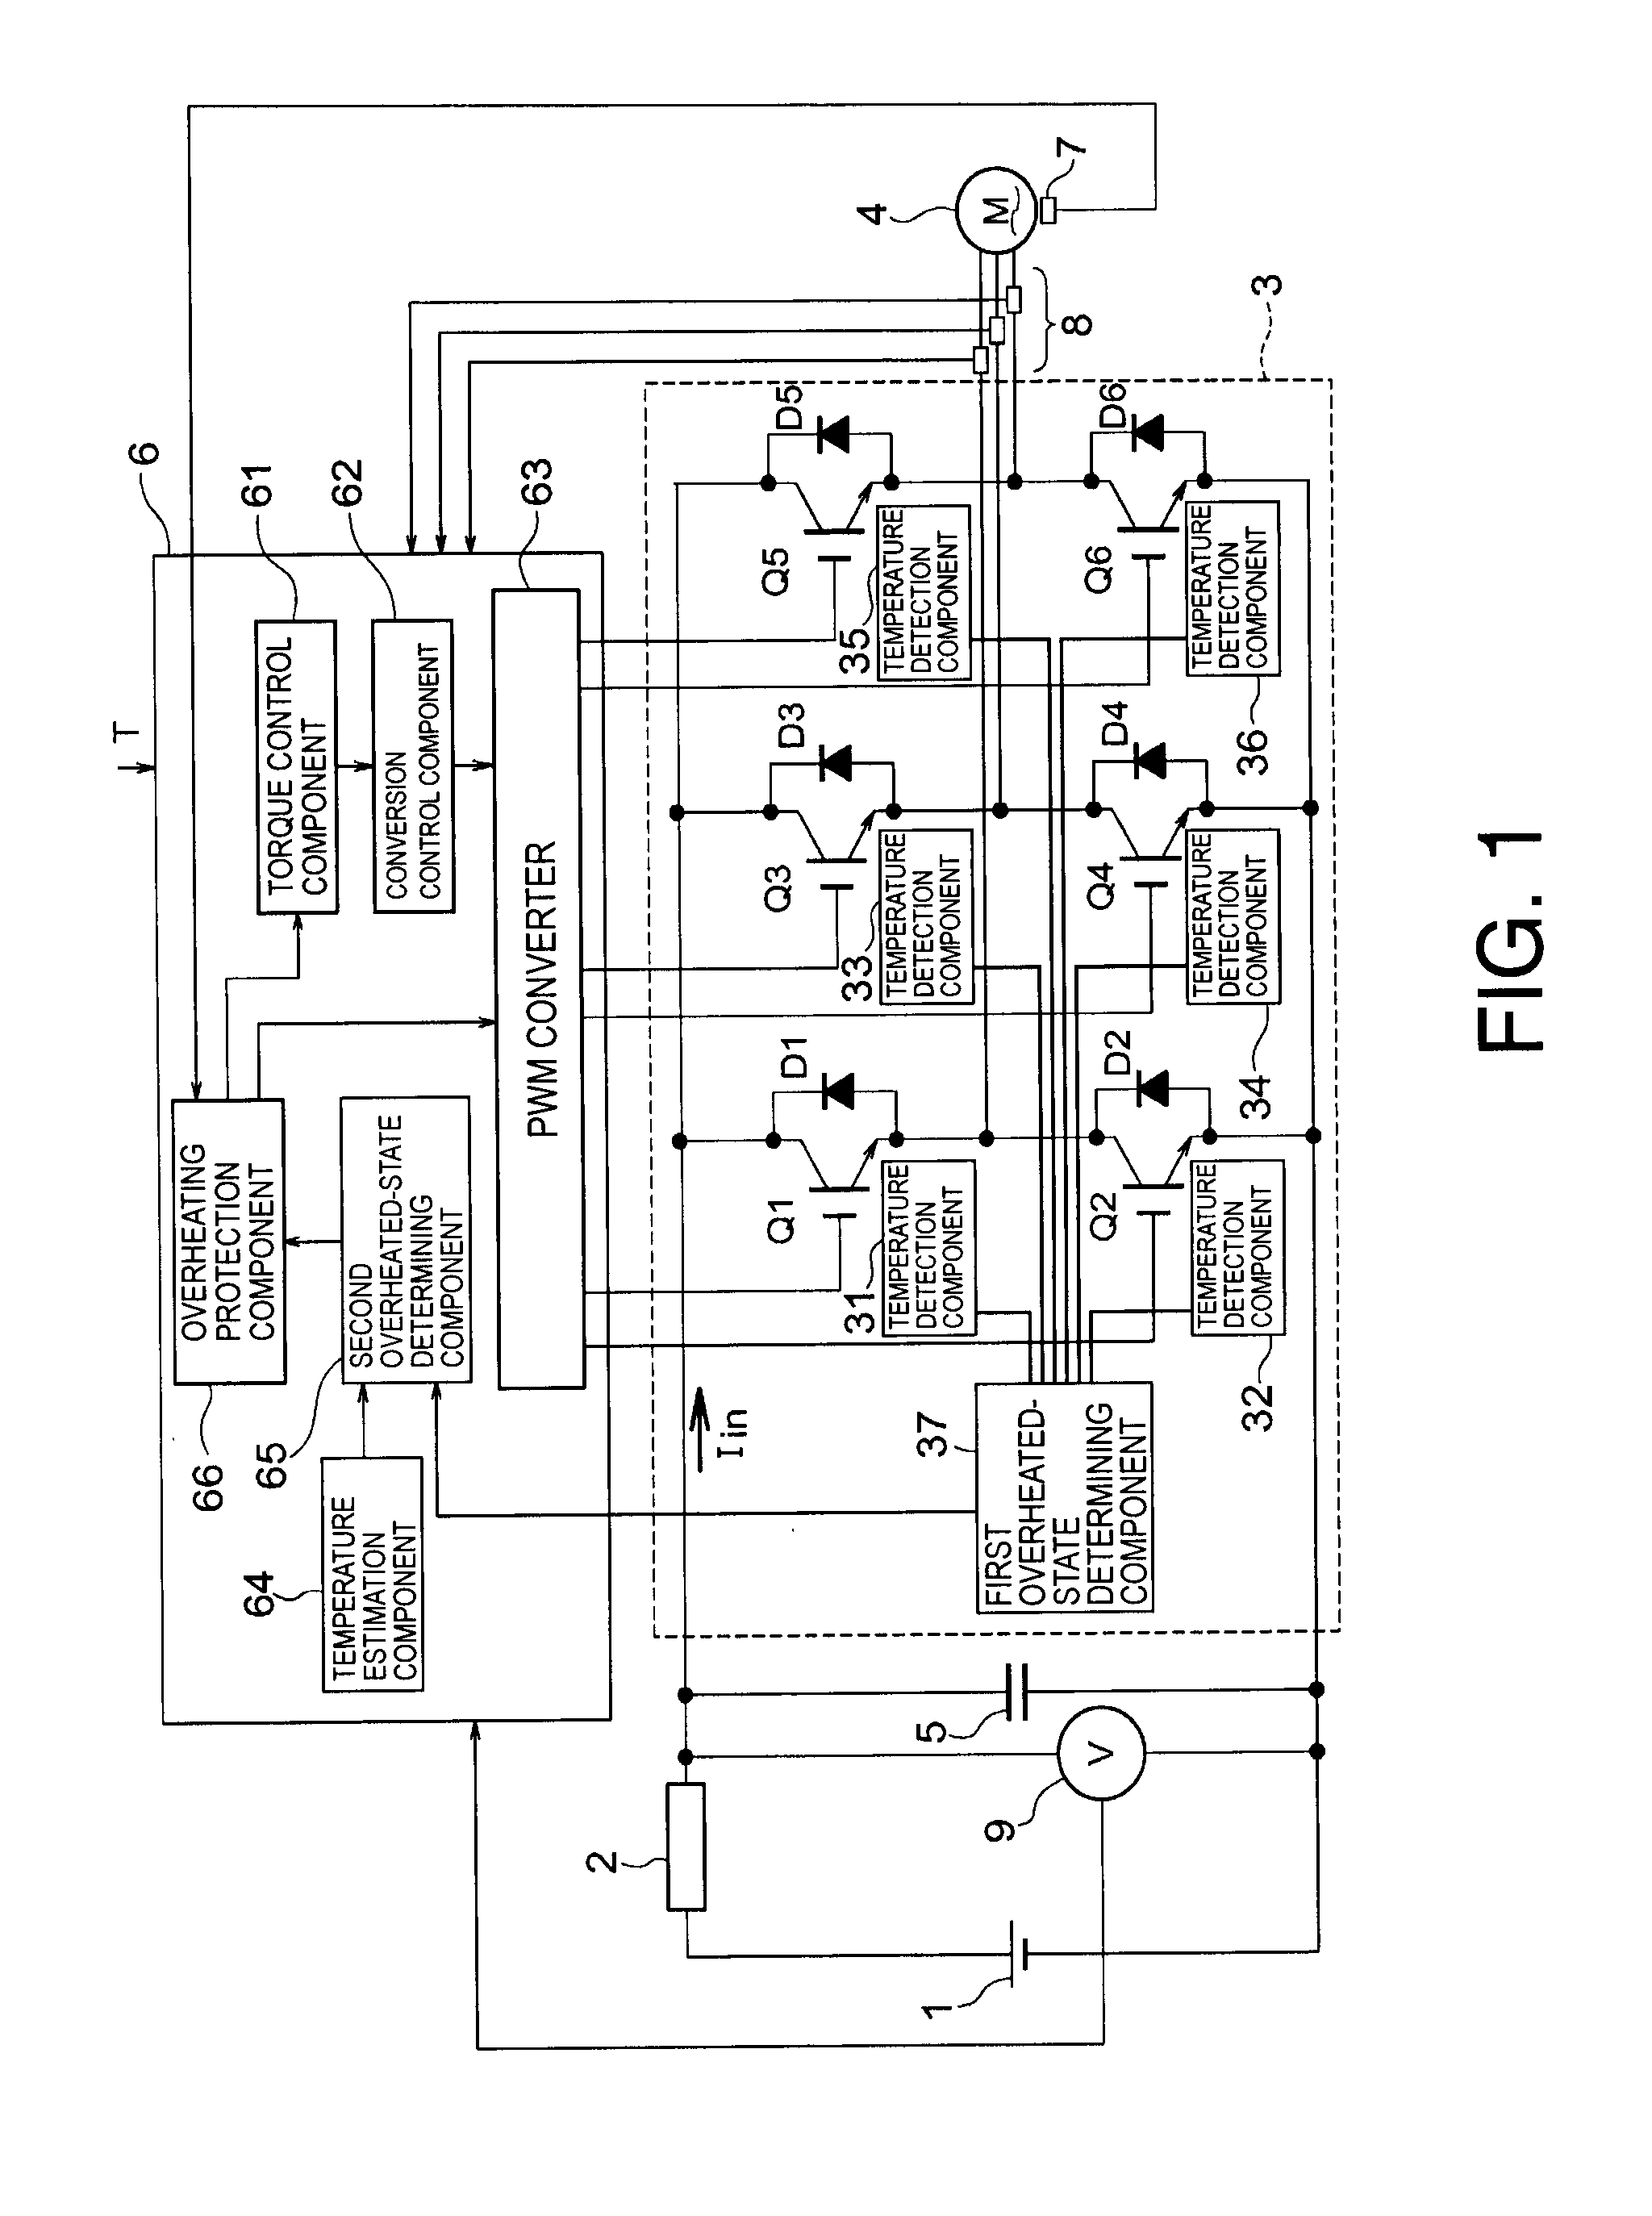 Temperature protection device